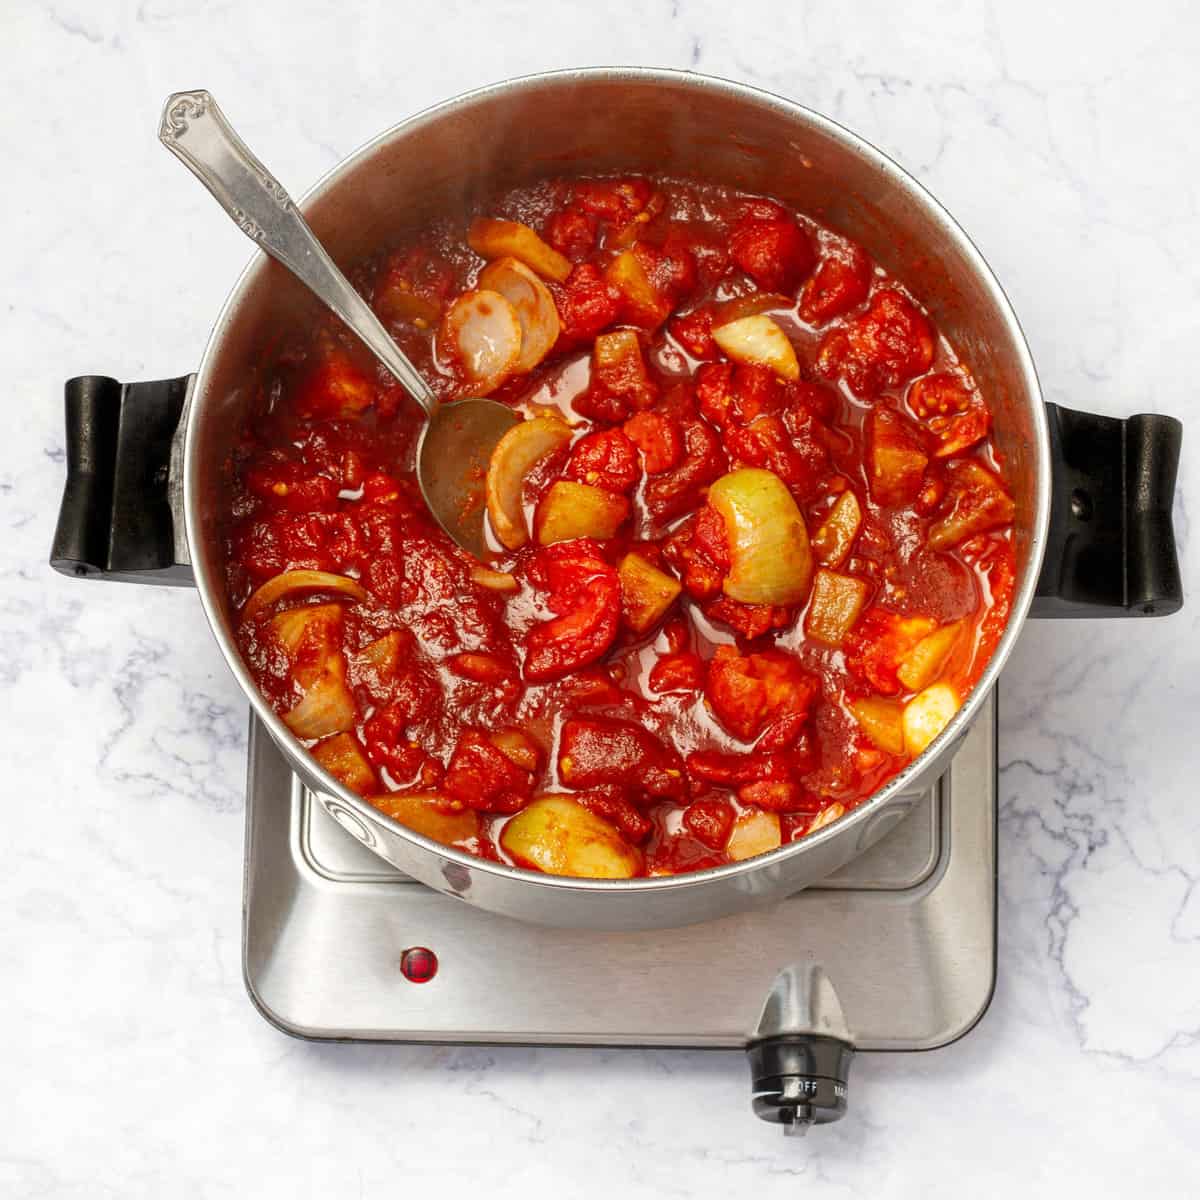 Cooking tomatoes in sauce pan